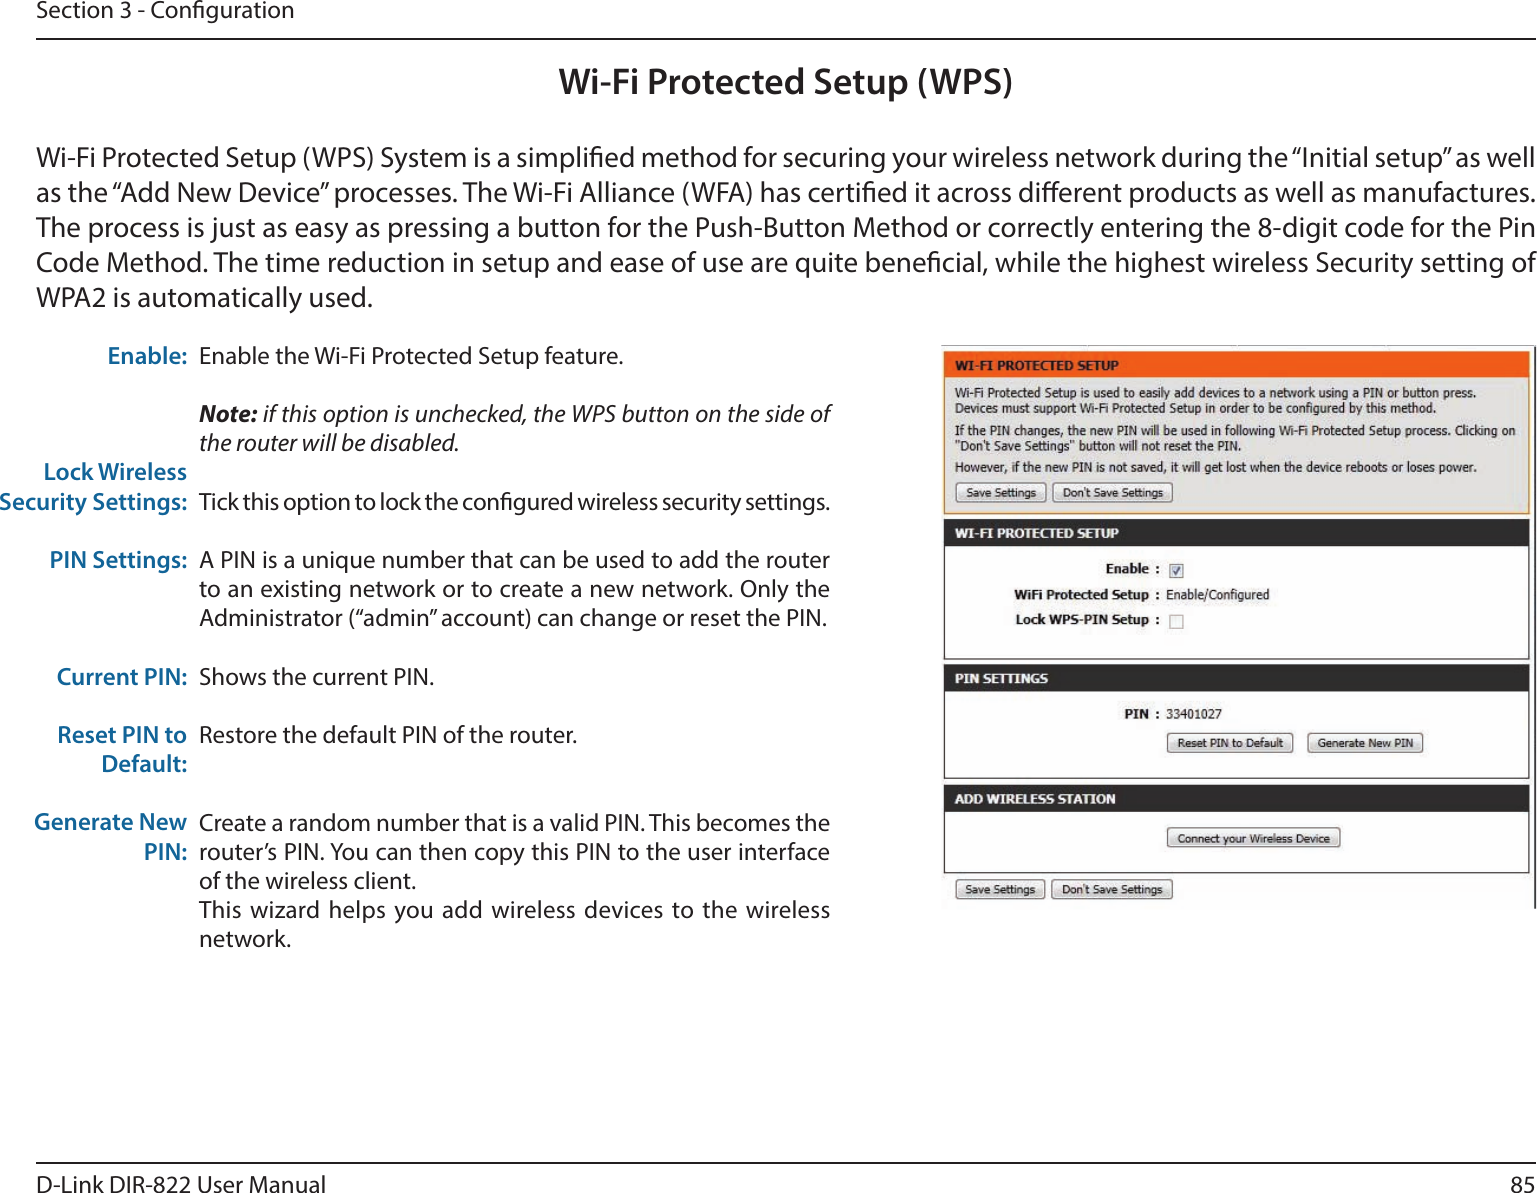 85D-Link DIR-822 User ManualSection 3 - CongurationWi-Fi Protected Setup (WPS)Enable the Wi-Fi Protected Setup feature. Note: if this option is unchecked, the WPS button on the side of the router will be disabled.Tick this option to lock the congured wireless security settings.A PIN is a unique number that can be used to add the router to an existing network or to create a new network. Only the Administrator (“admin” account) can change or reset the PIN. Shows the current PIN. Restore the default PIN of the router. Create a random number that is a valid PIN. This becomes the router’s PIN. You can then copy this PIN to the user interface of the wireless client.This wizard helps you add wireless devices to the wireless network.Enable:Lock Wireless Security Settings:PIN Settings:Current PIN:Reset PIN to Default:Generate New PIN:Wi-Fi Protected Setup (WPS) System is a simplied method for securing your wireless network during the “Initial setup” as well as the “Add New Device” processes. The Wi-Fi Alliance (WFA) has certied it across dierent products as well as manufactures. The process is just as easy as pressing a button for the Push-Button Method or correctly entering the 8-digit code for the Pin Code Method. The time reduction in setup and ease of use are quite benecial, while the highest wireless Security setting of WPA2 is automatically used.